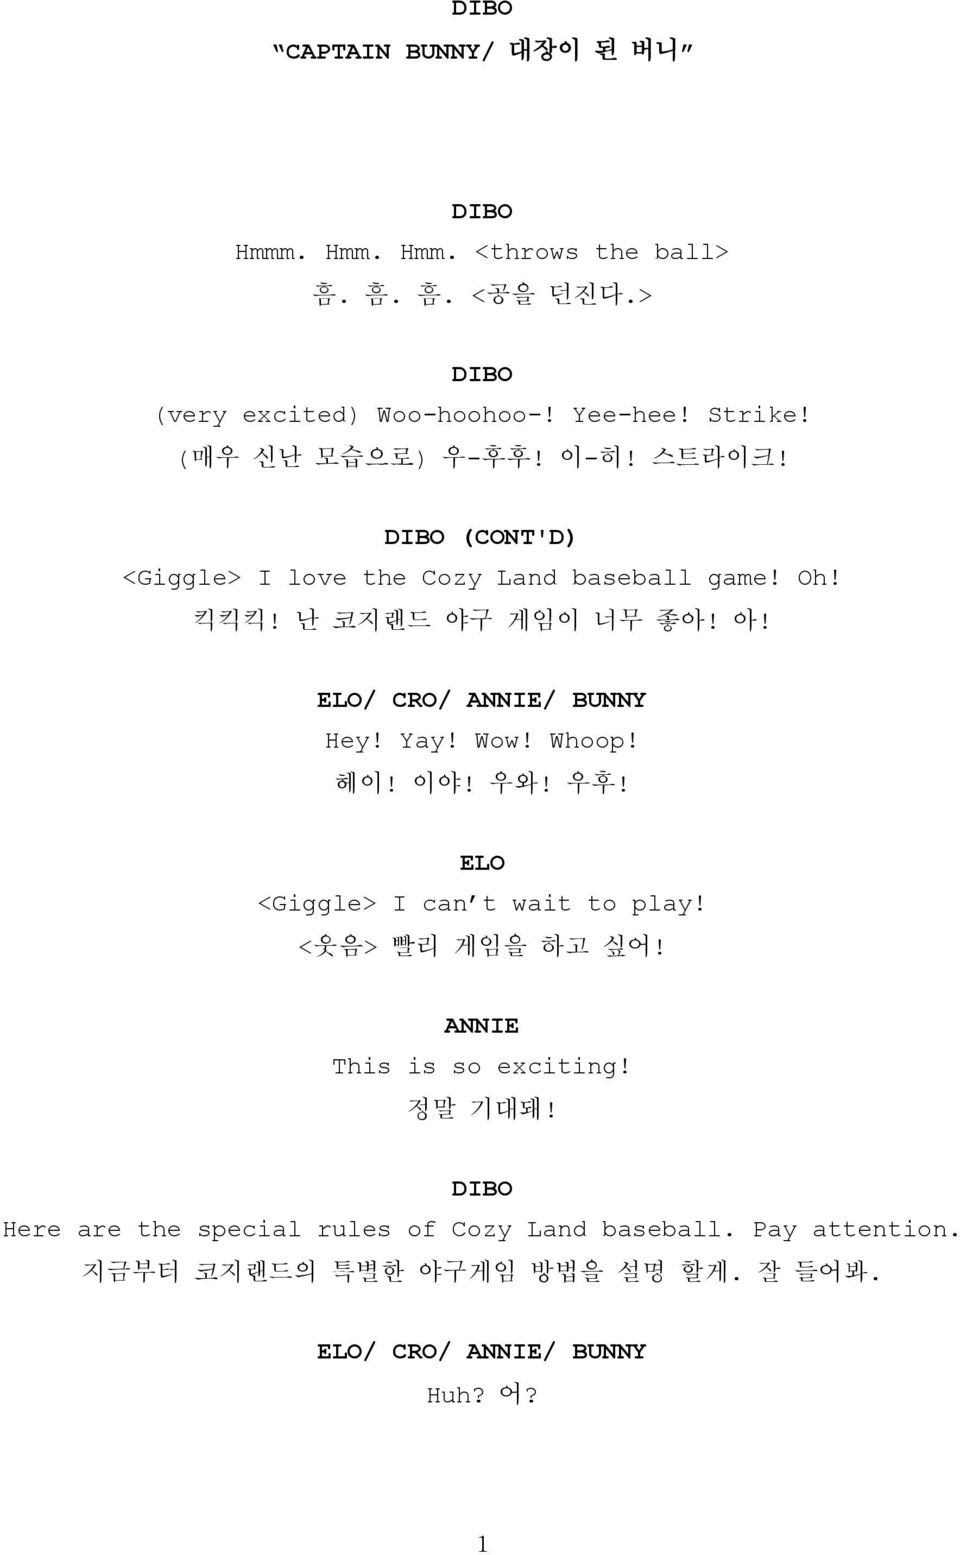 / / / Hey! Yay! Wow! Whoop! 헤이! 이야! 우와! 우후! <Giggle> I can t wait to play! <웃음> 빨리 게임을 하고 싶어! This is so exciting!